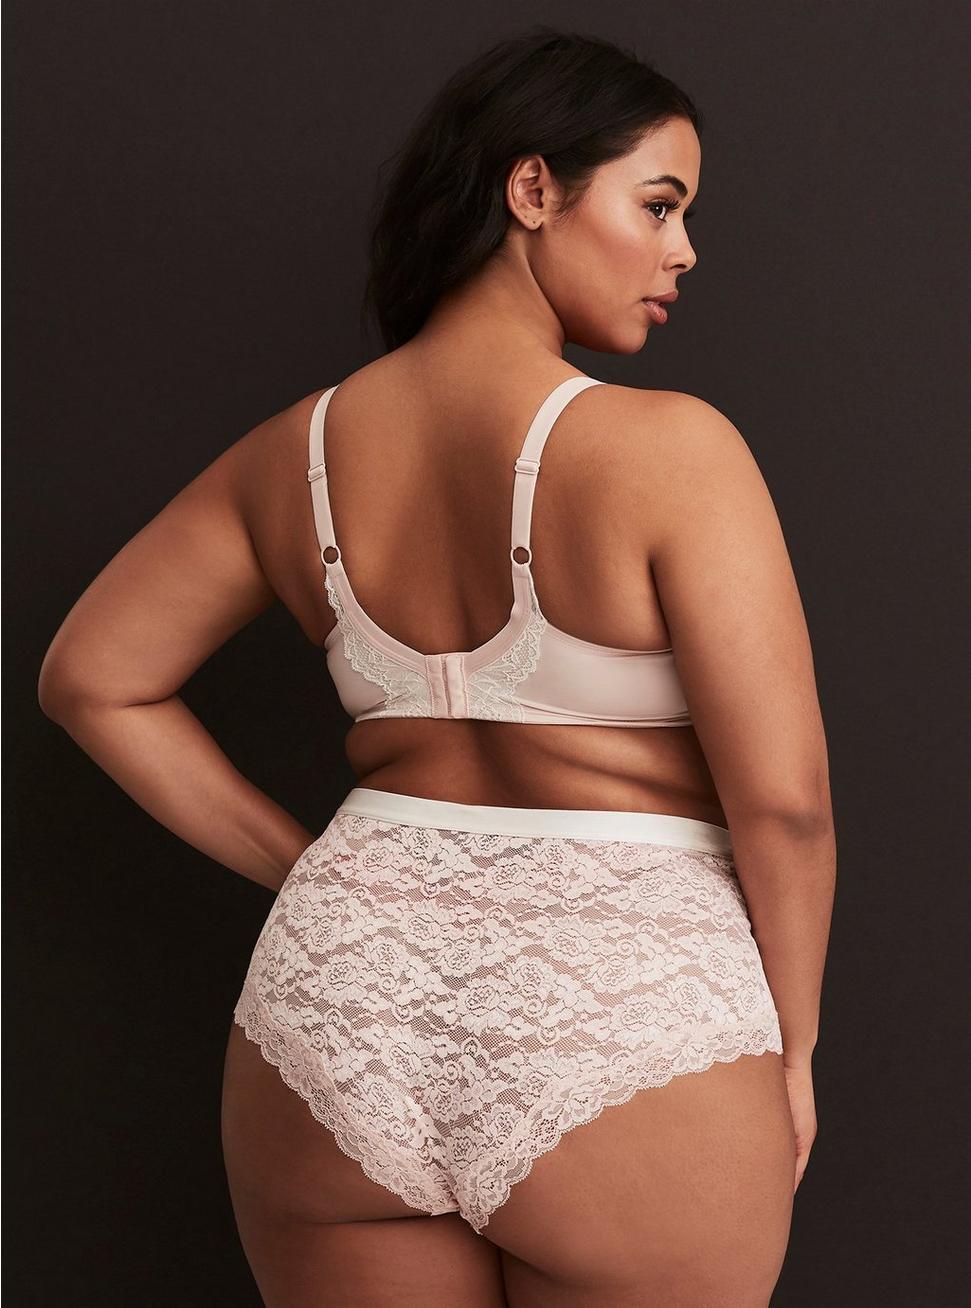 Plus Size - Lace High-Rise Cheeky Panty - Torrid